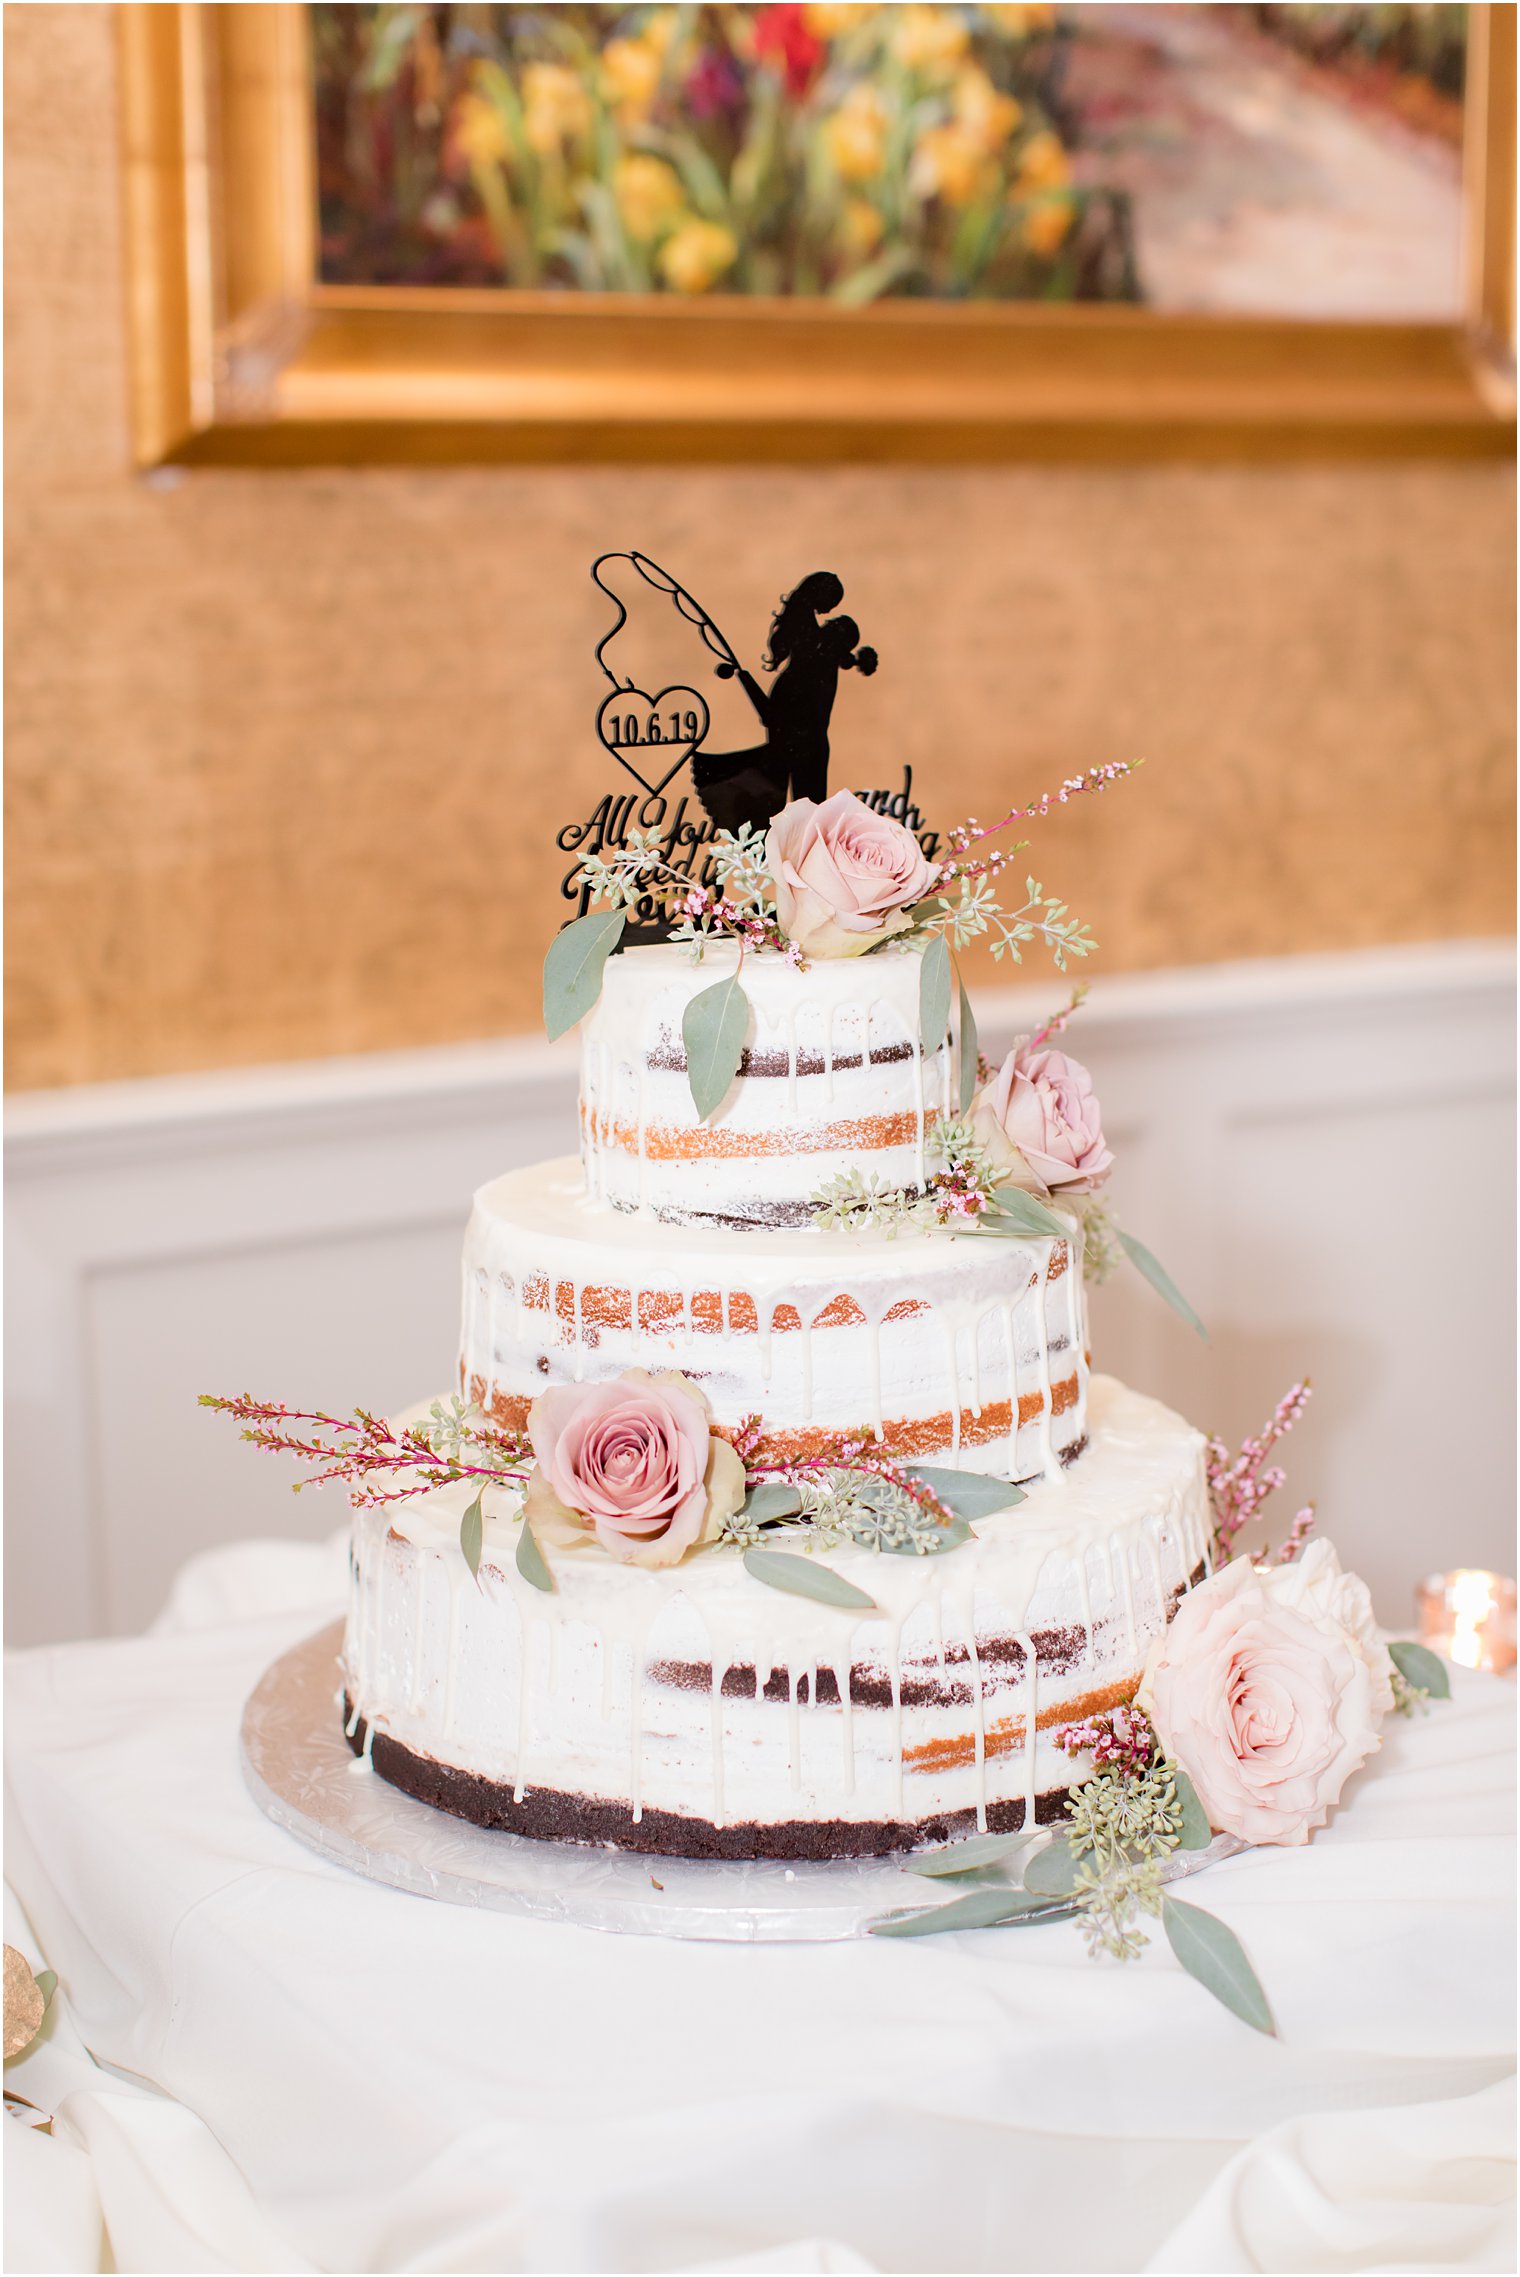 Naked Wedding cake with icing drips photographed by Idalia Photography